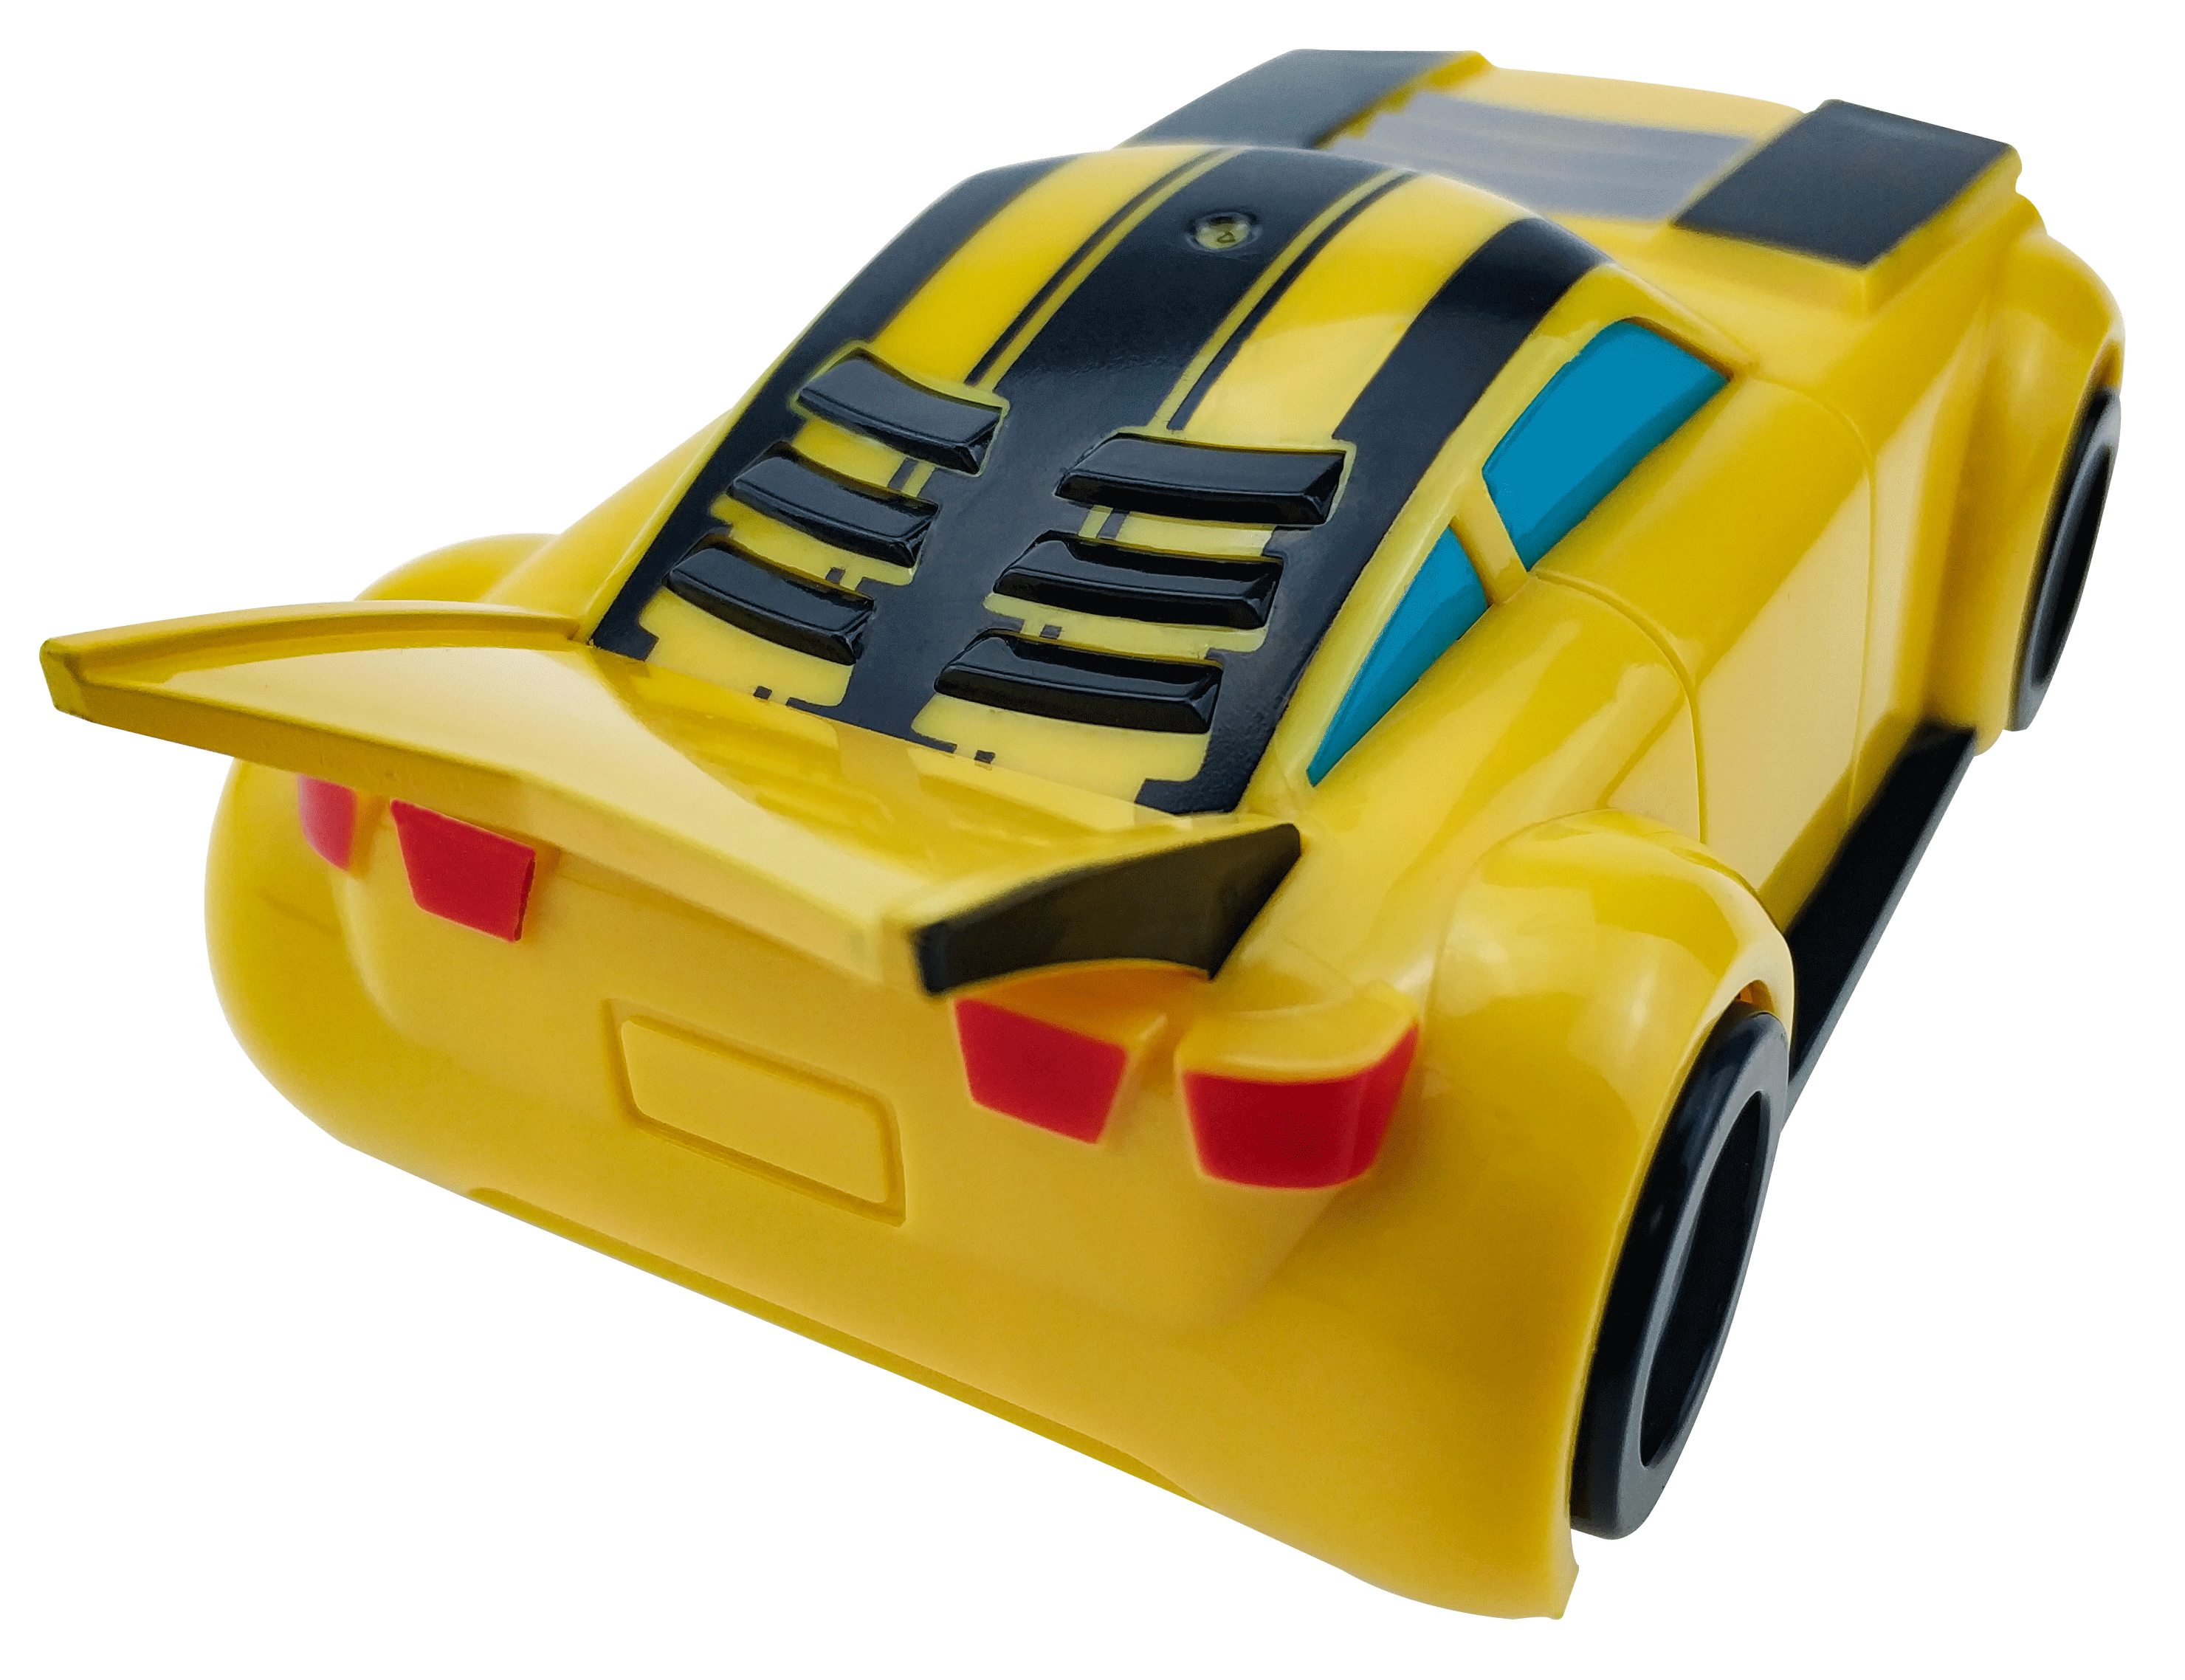 Transformers Rescue Bots 12CM Bumblebee Friction Car